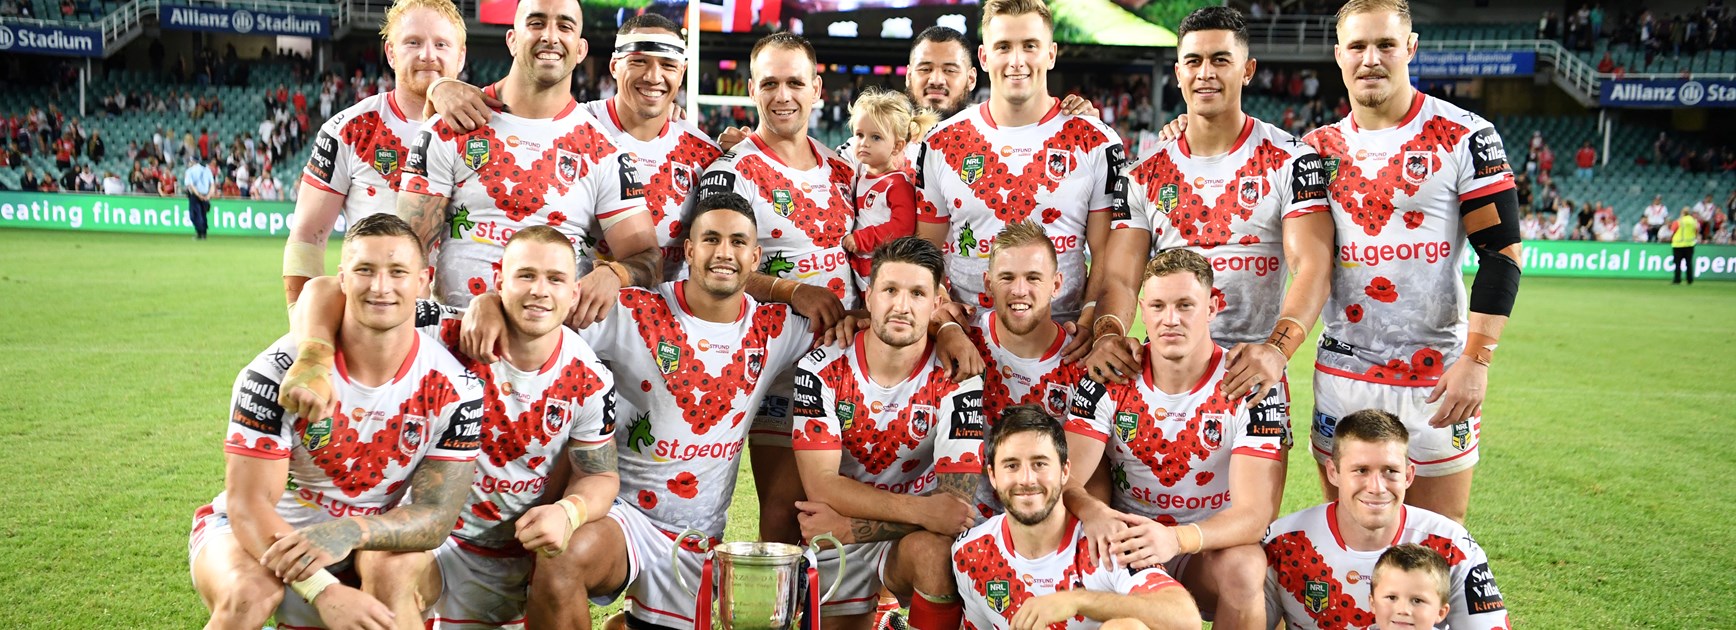 The winning 2018 Anzac Day team - the Dragons.